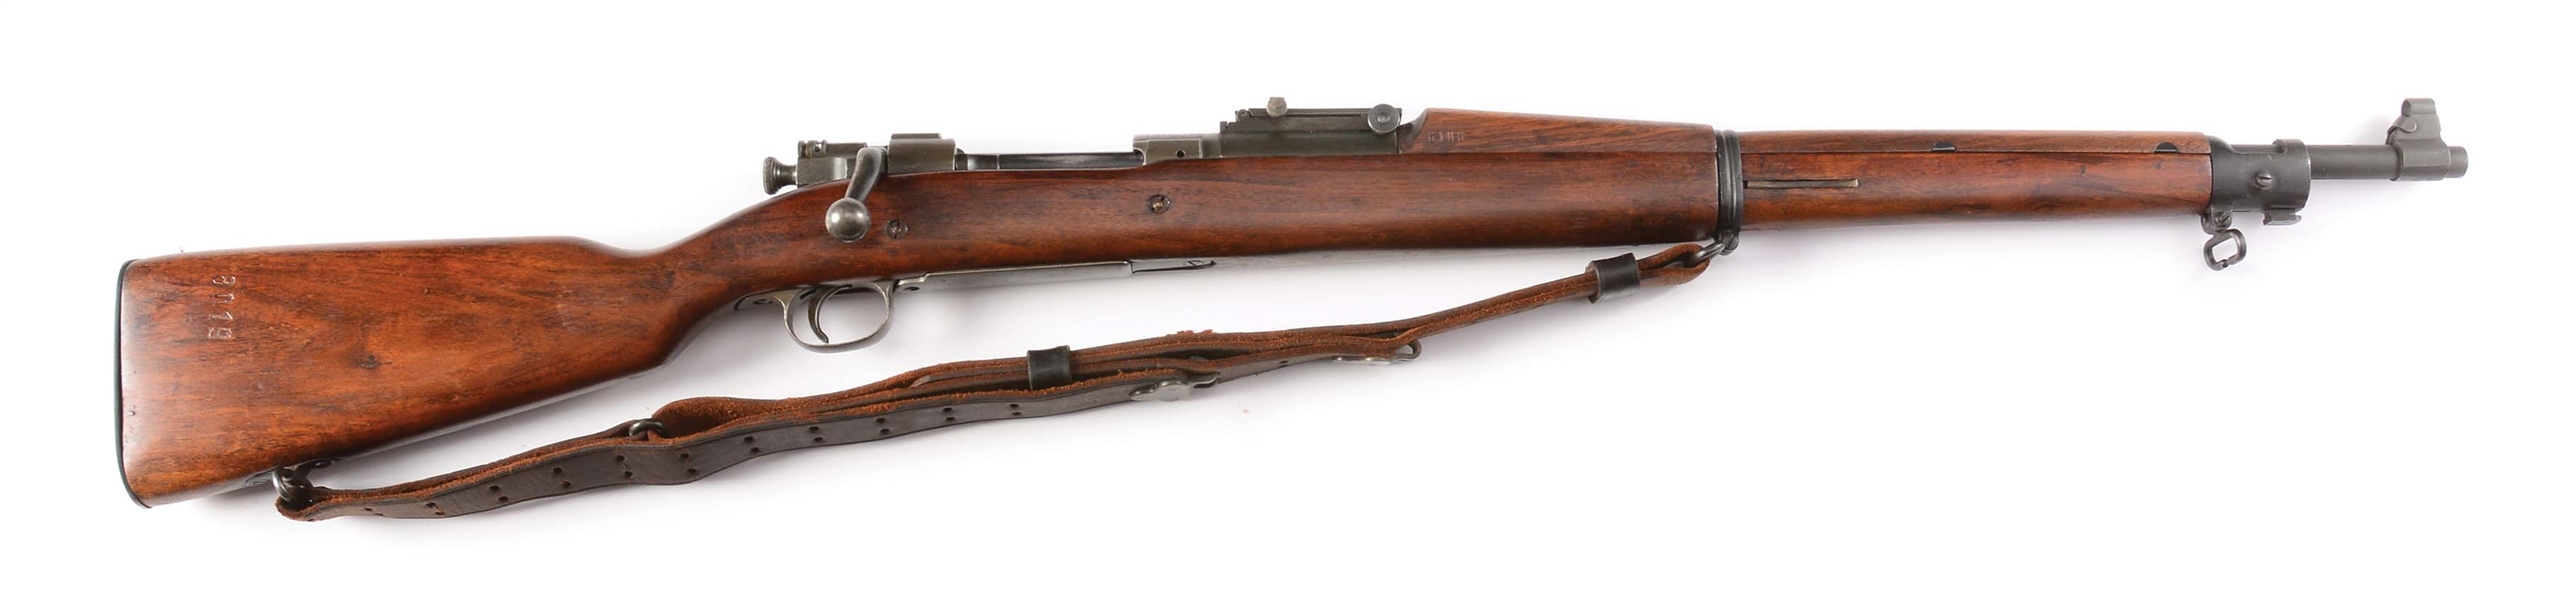 (C) US SPRINGFIELD ARMORY MODEL 1903 BOLT ACTION RIFLE (1936).